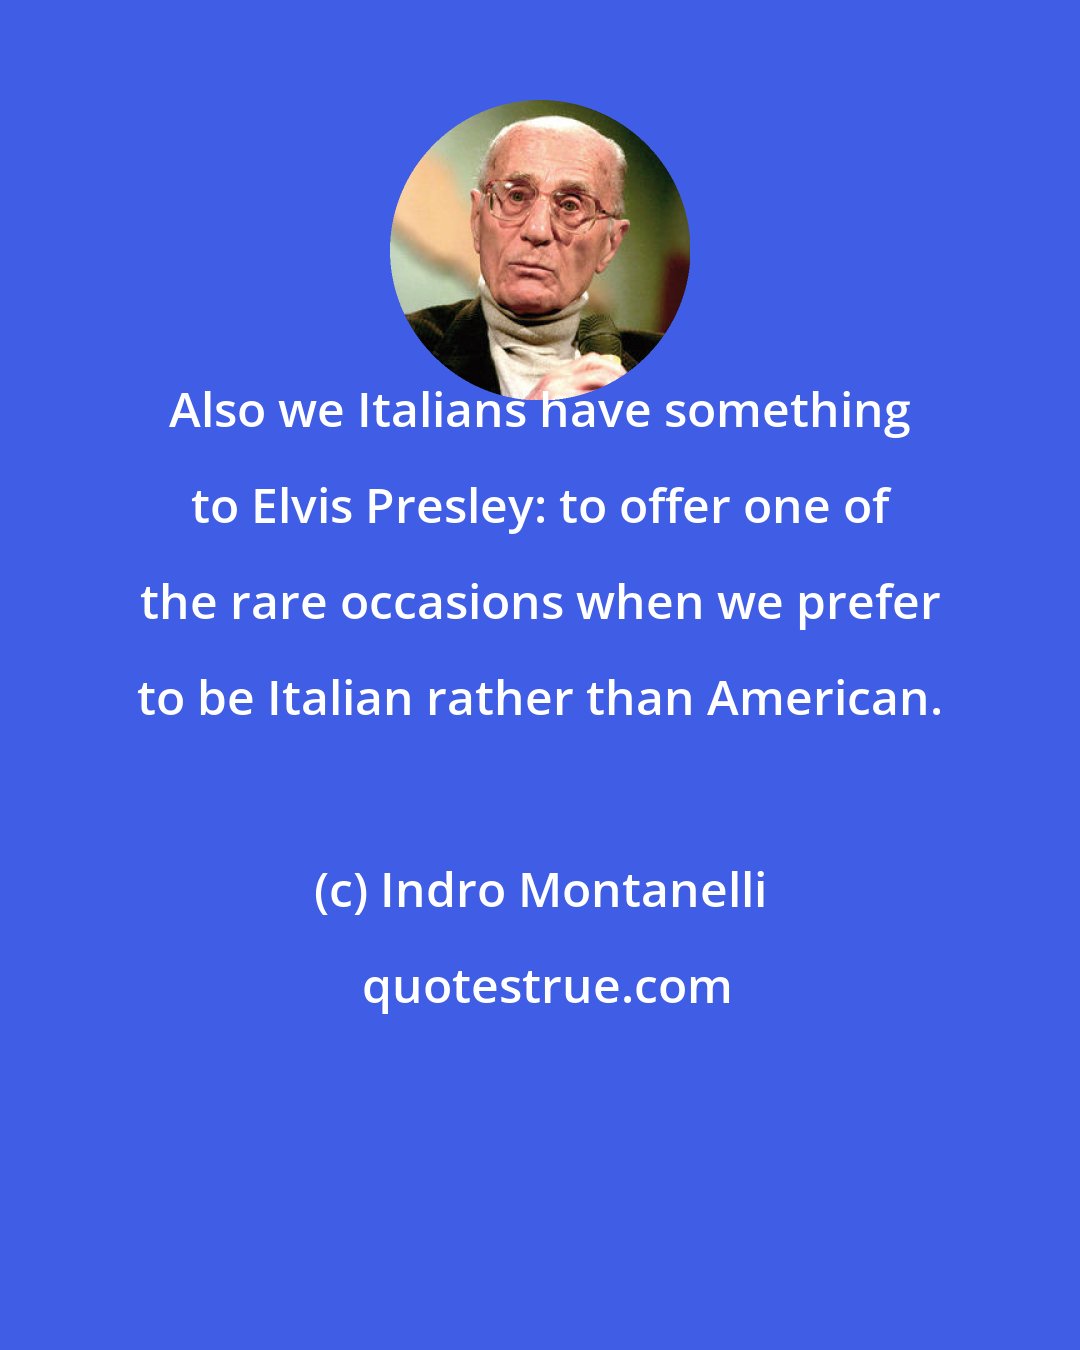 Indro Montanelli: Also we Italians have something to Elvis Presley: to offer one of the rare occasions when we prefer to be Italian rather than American.